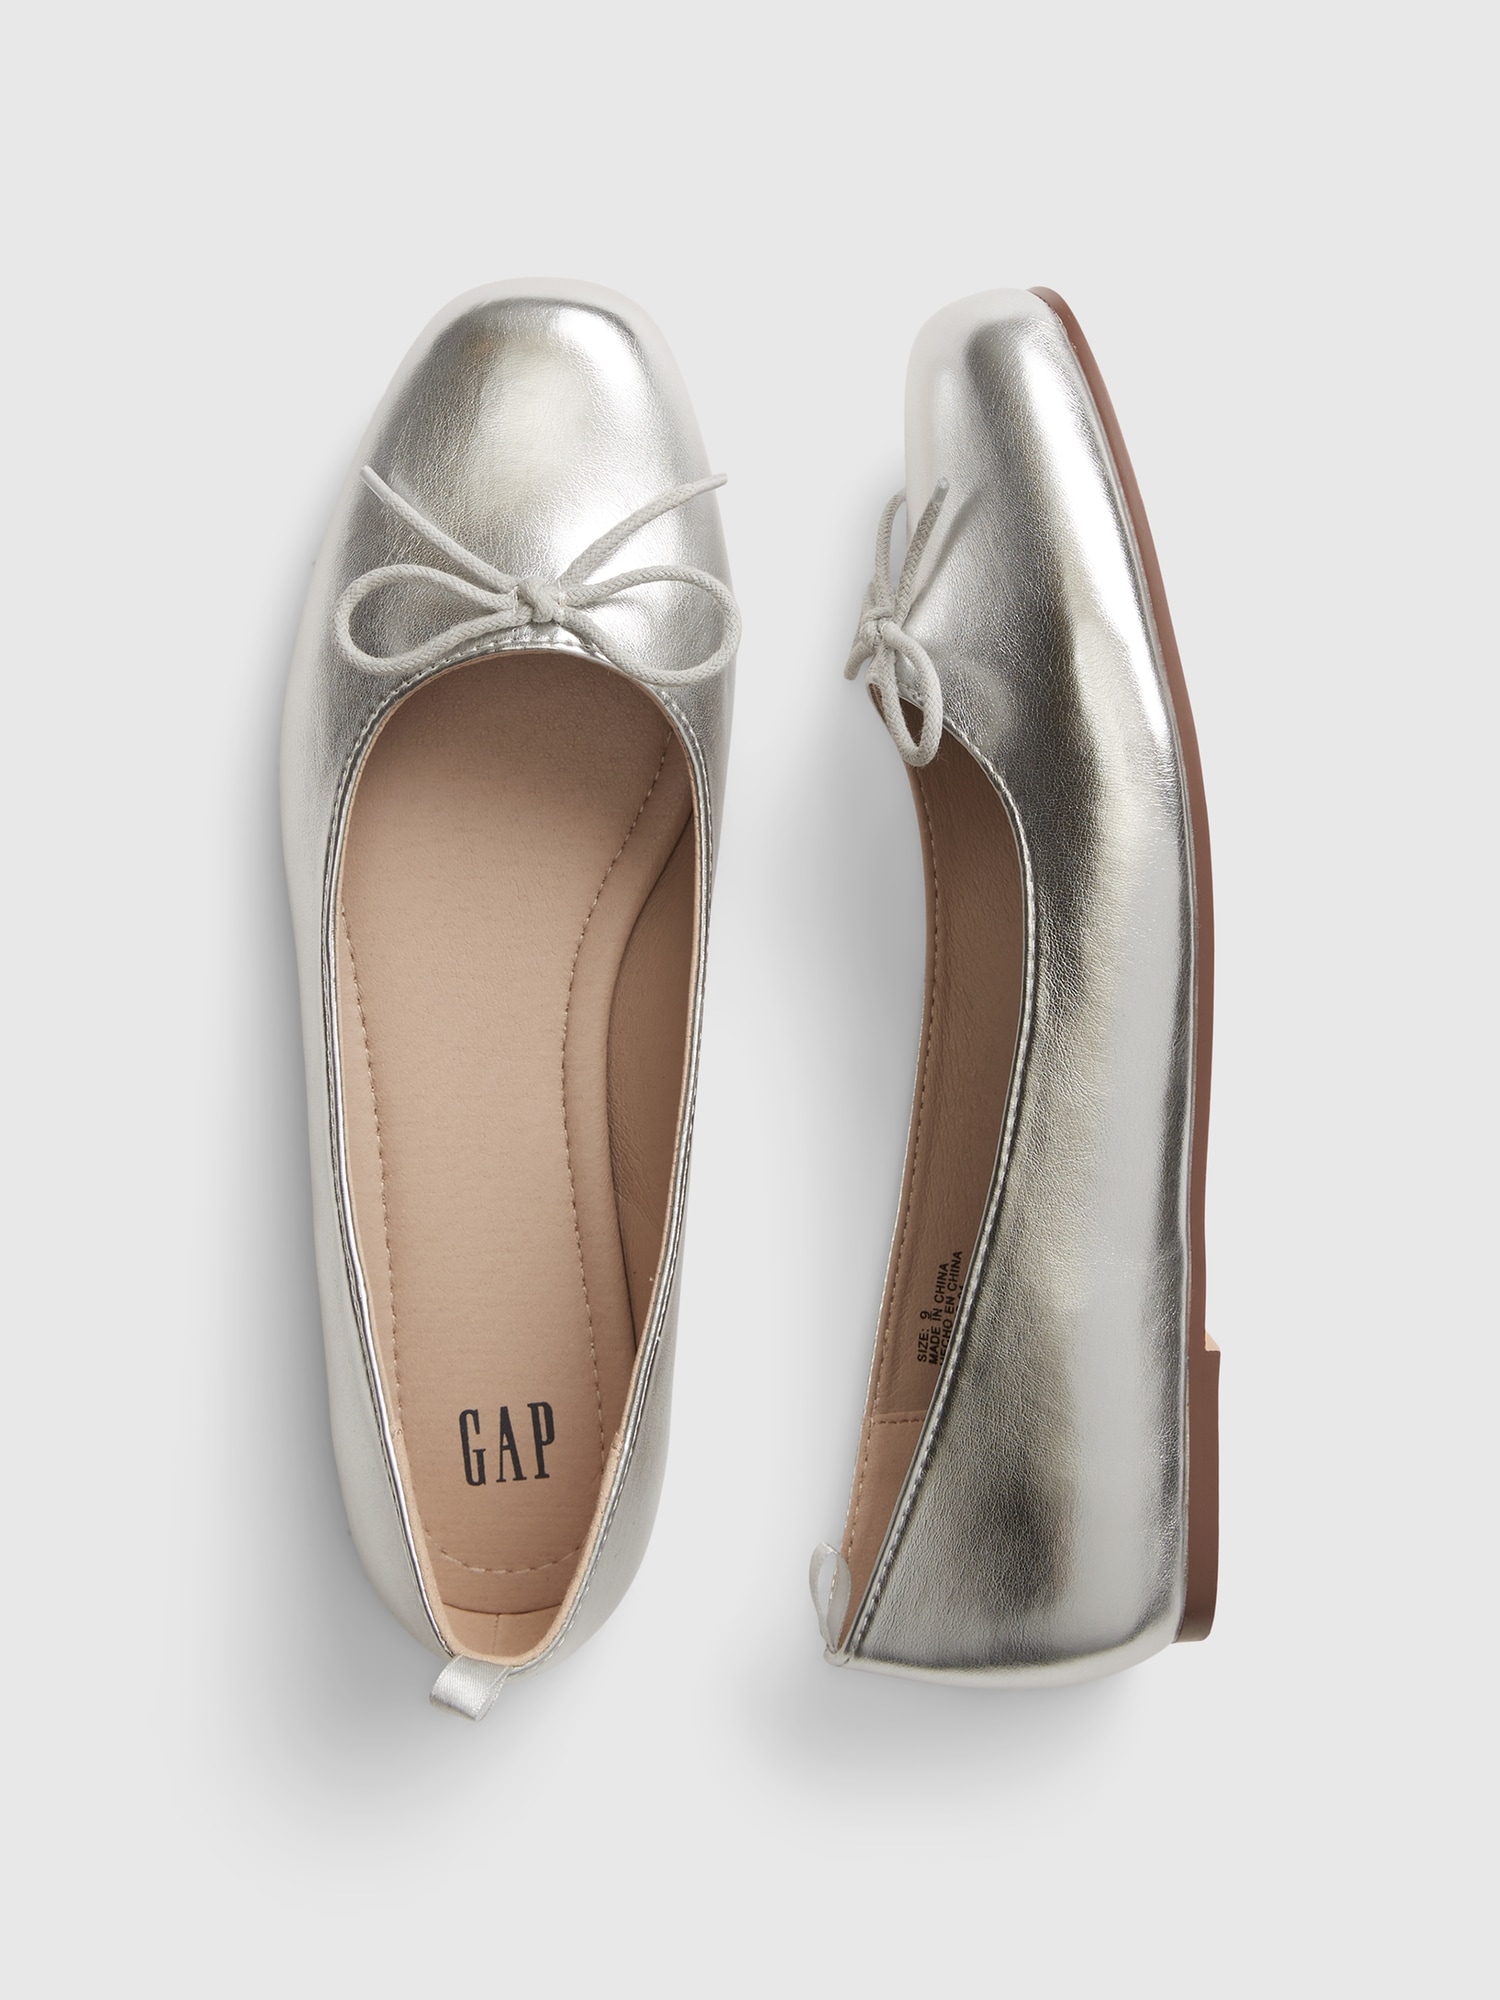 Silver Ballet Flats in Different Seasons